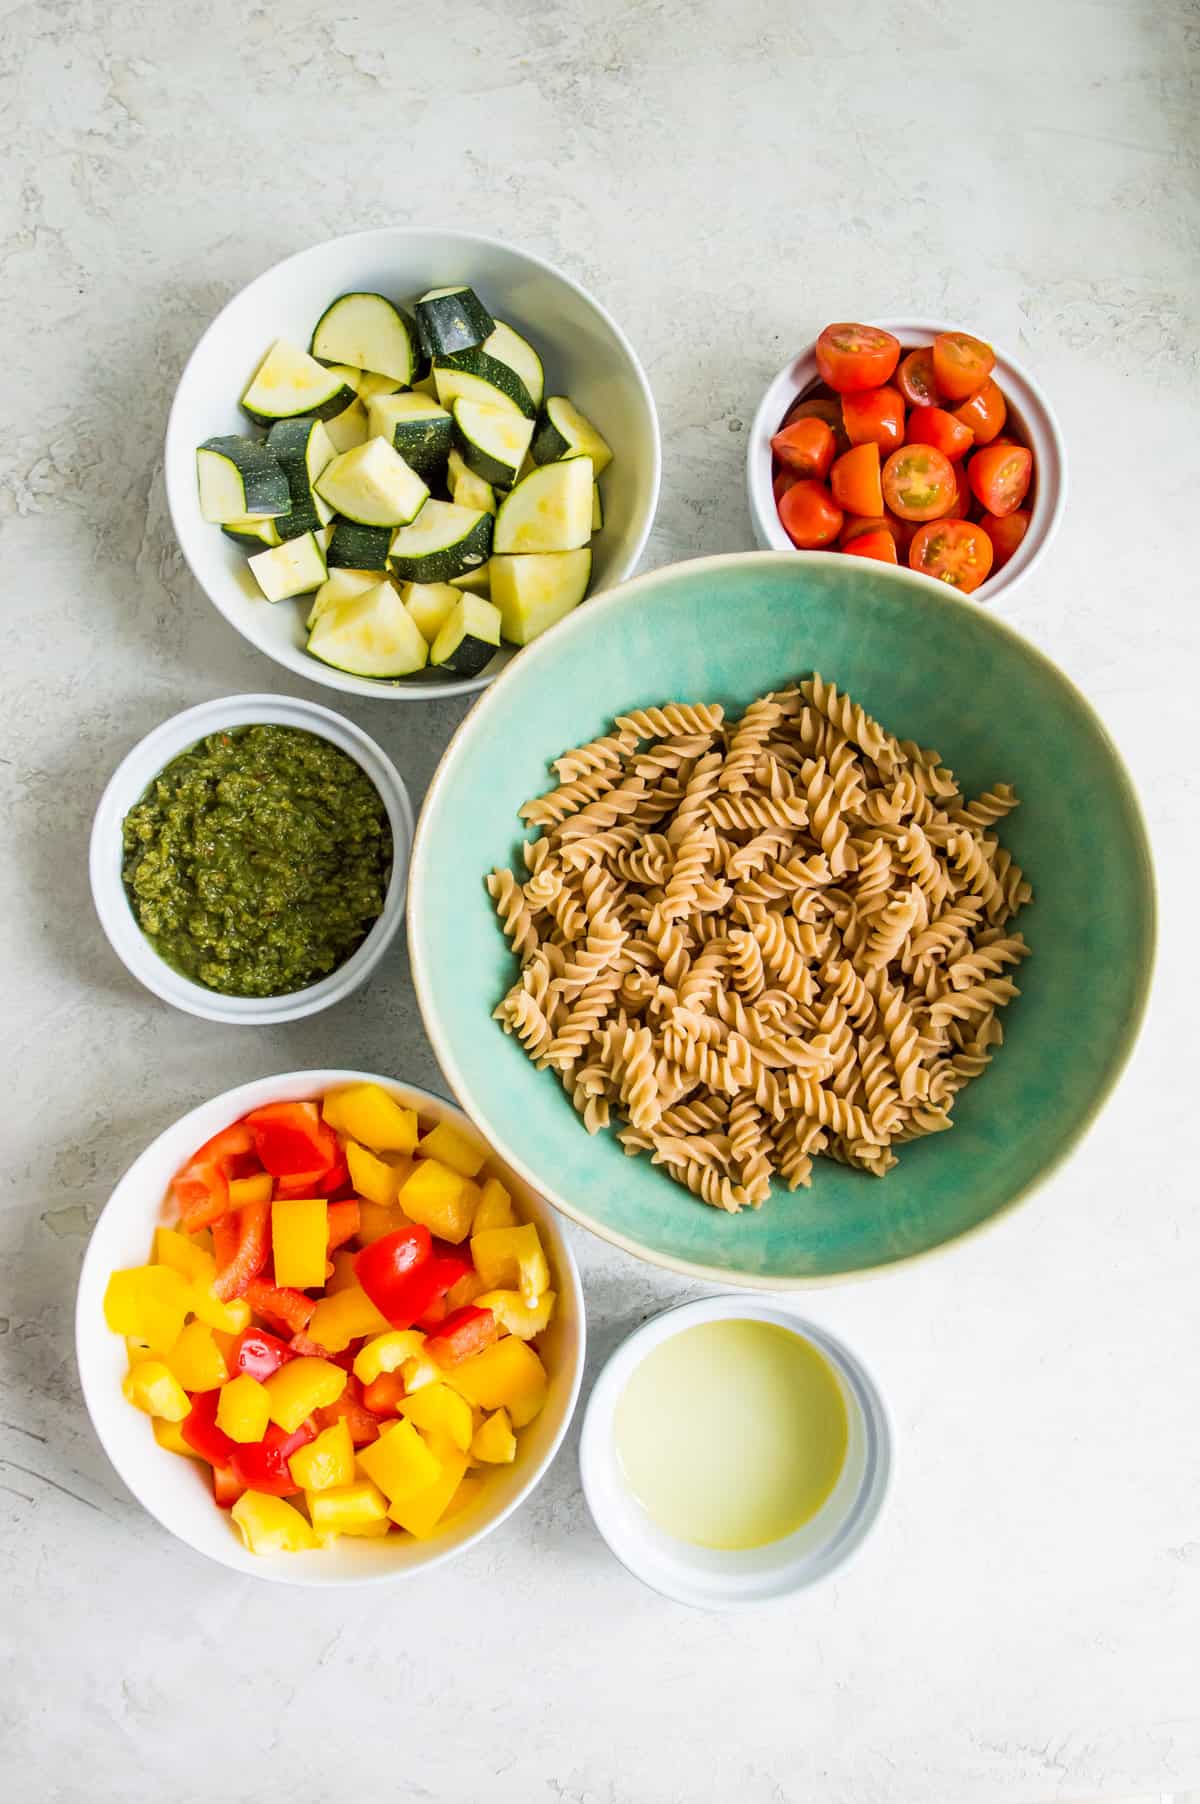 The ingredients needed to make veggie pesto pasta in small bowls.